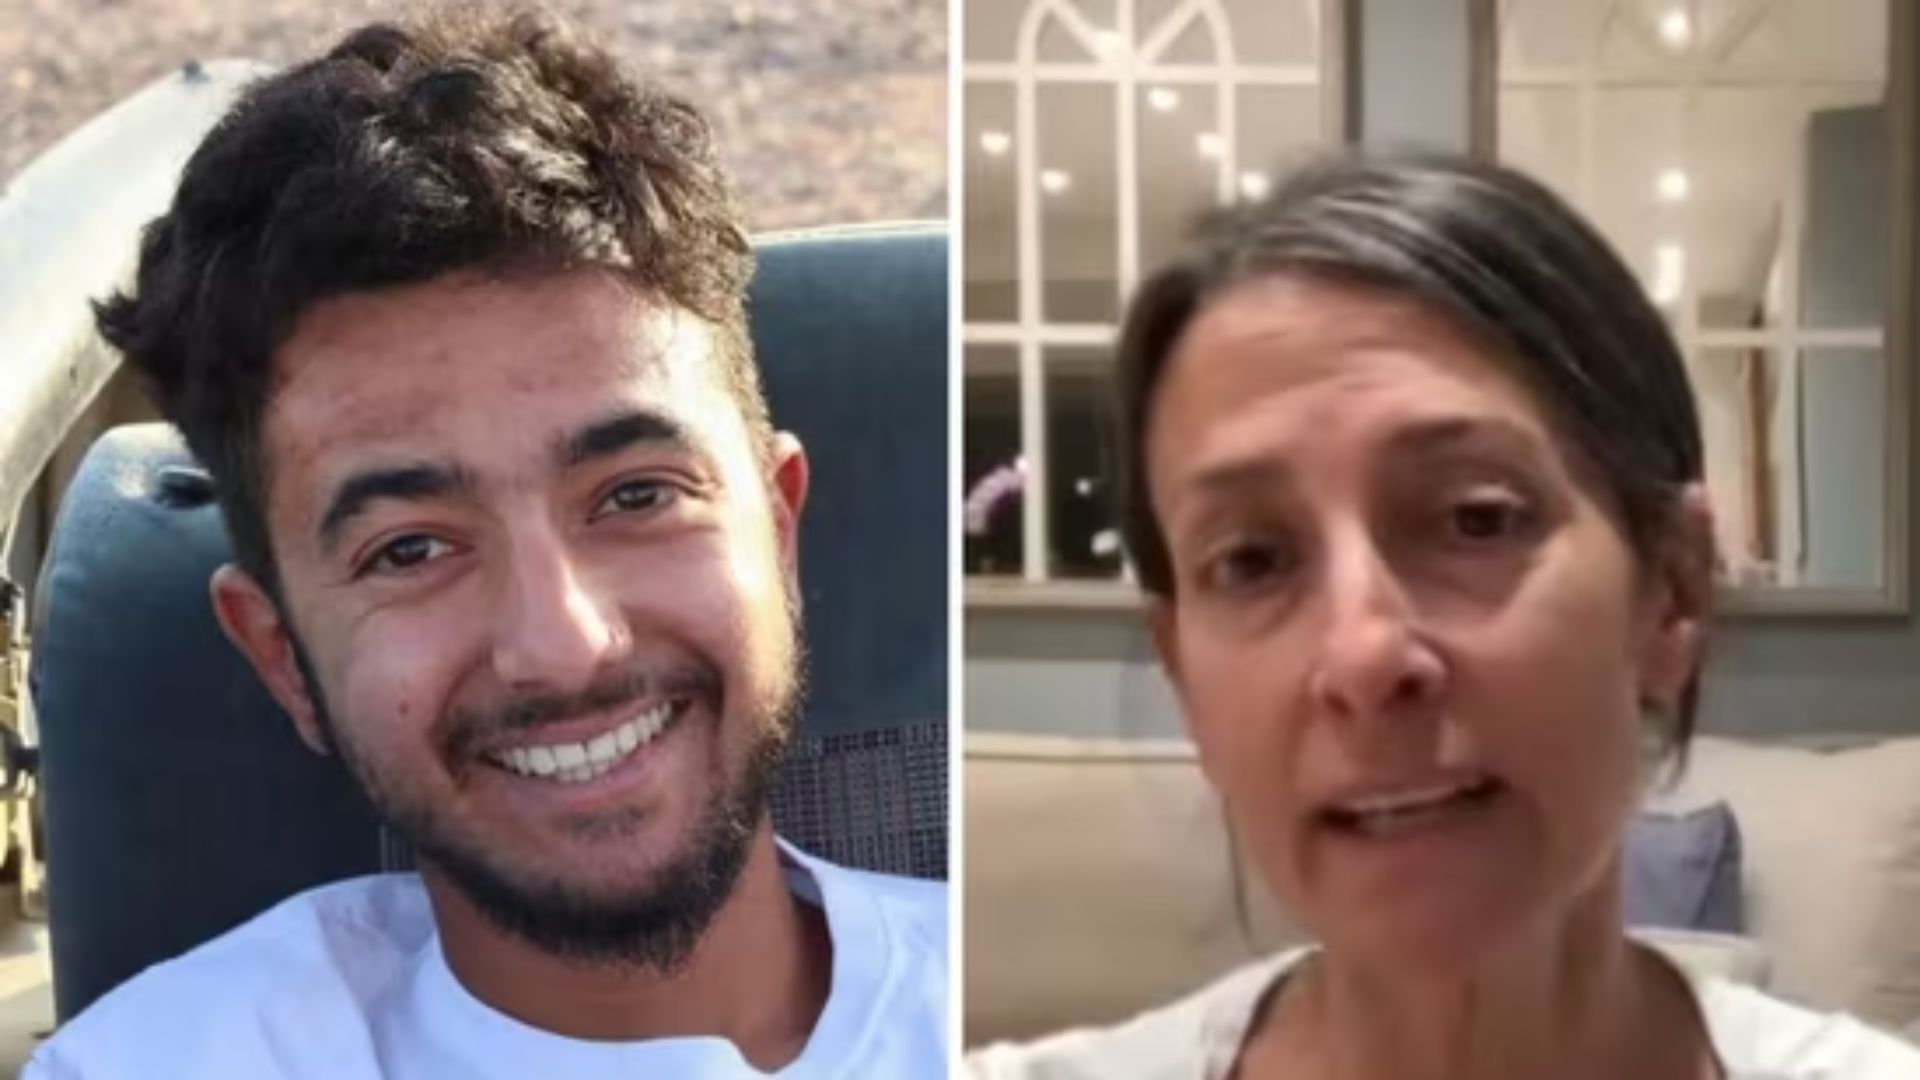 ‘I don’t want to let you go’ Tragic Mother’s Day message From Hostage Hersh Goldberg-Polin’s mother